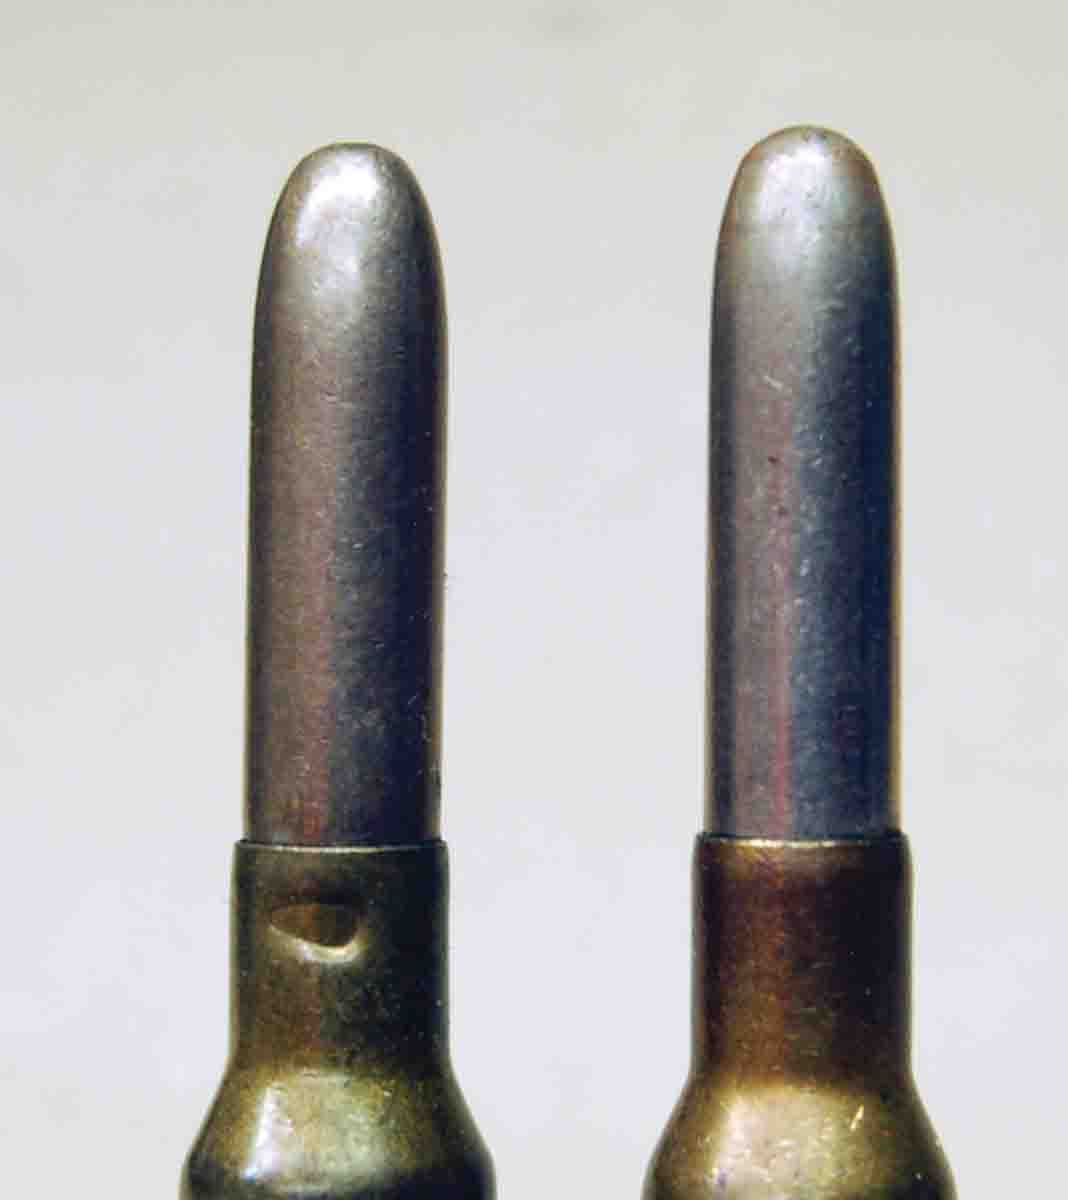 In 1907 a strange, three-point stab crimp was placed on the case neck (left) of the 6.5 Carcano. It became a standard case mouth crimp (right) before World War II.